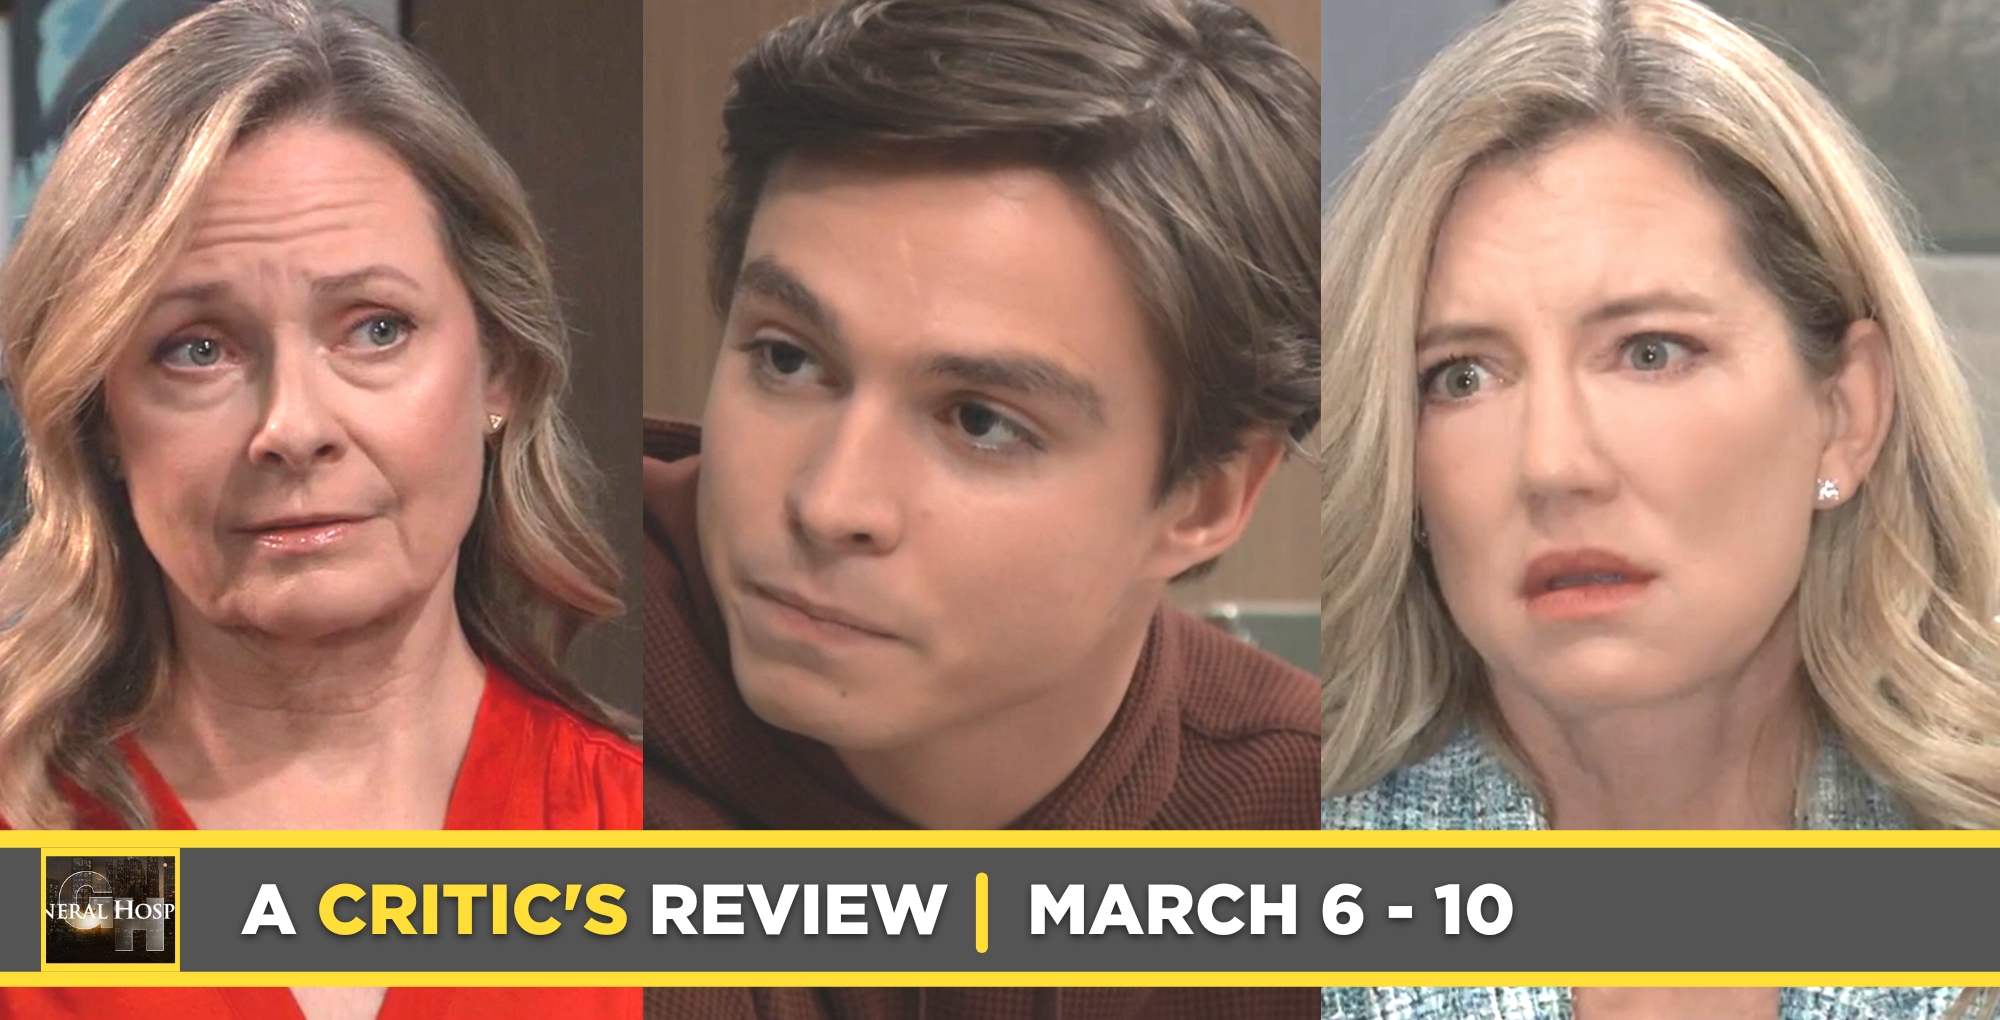 general hospital critic's review for march 6 – march 10, 2023, three images gladys, spencer, and nina